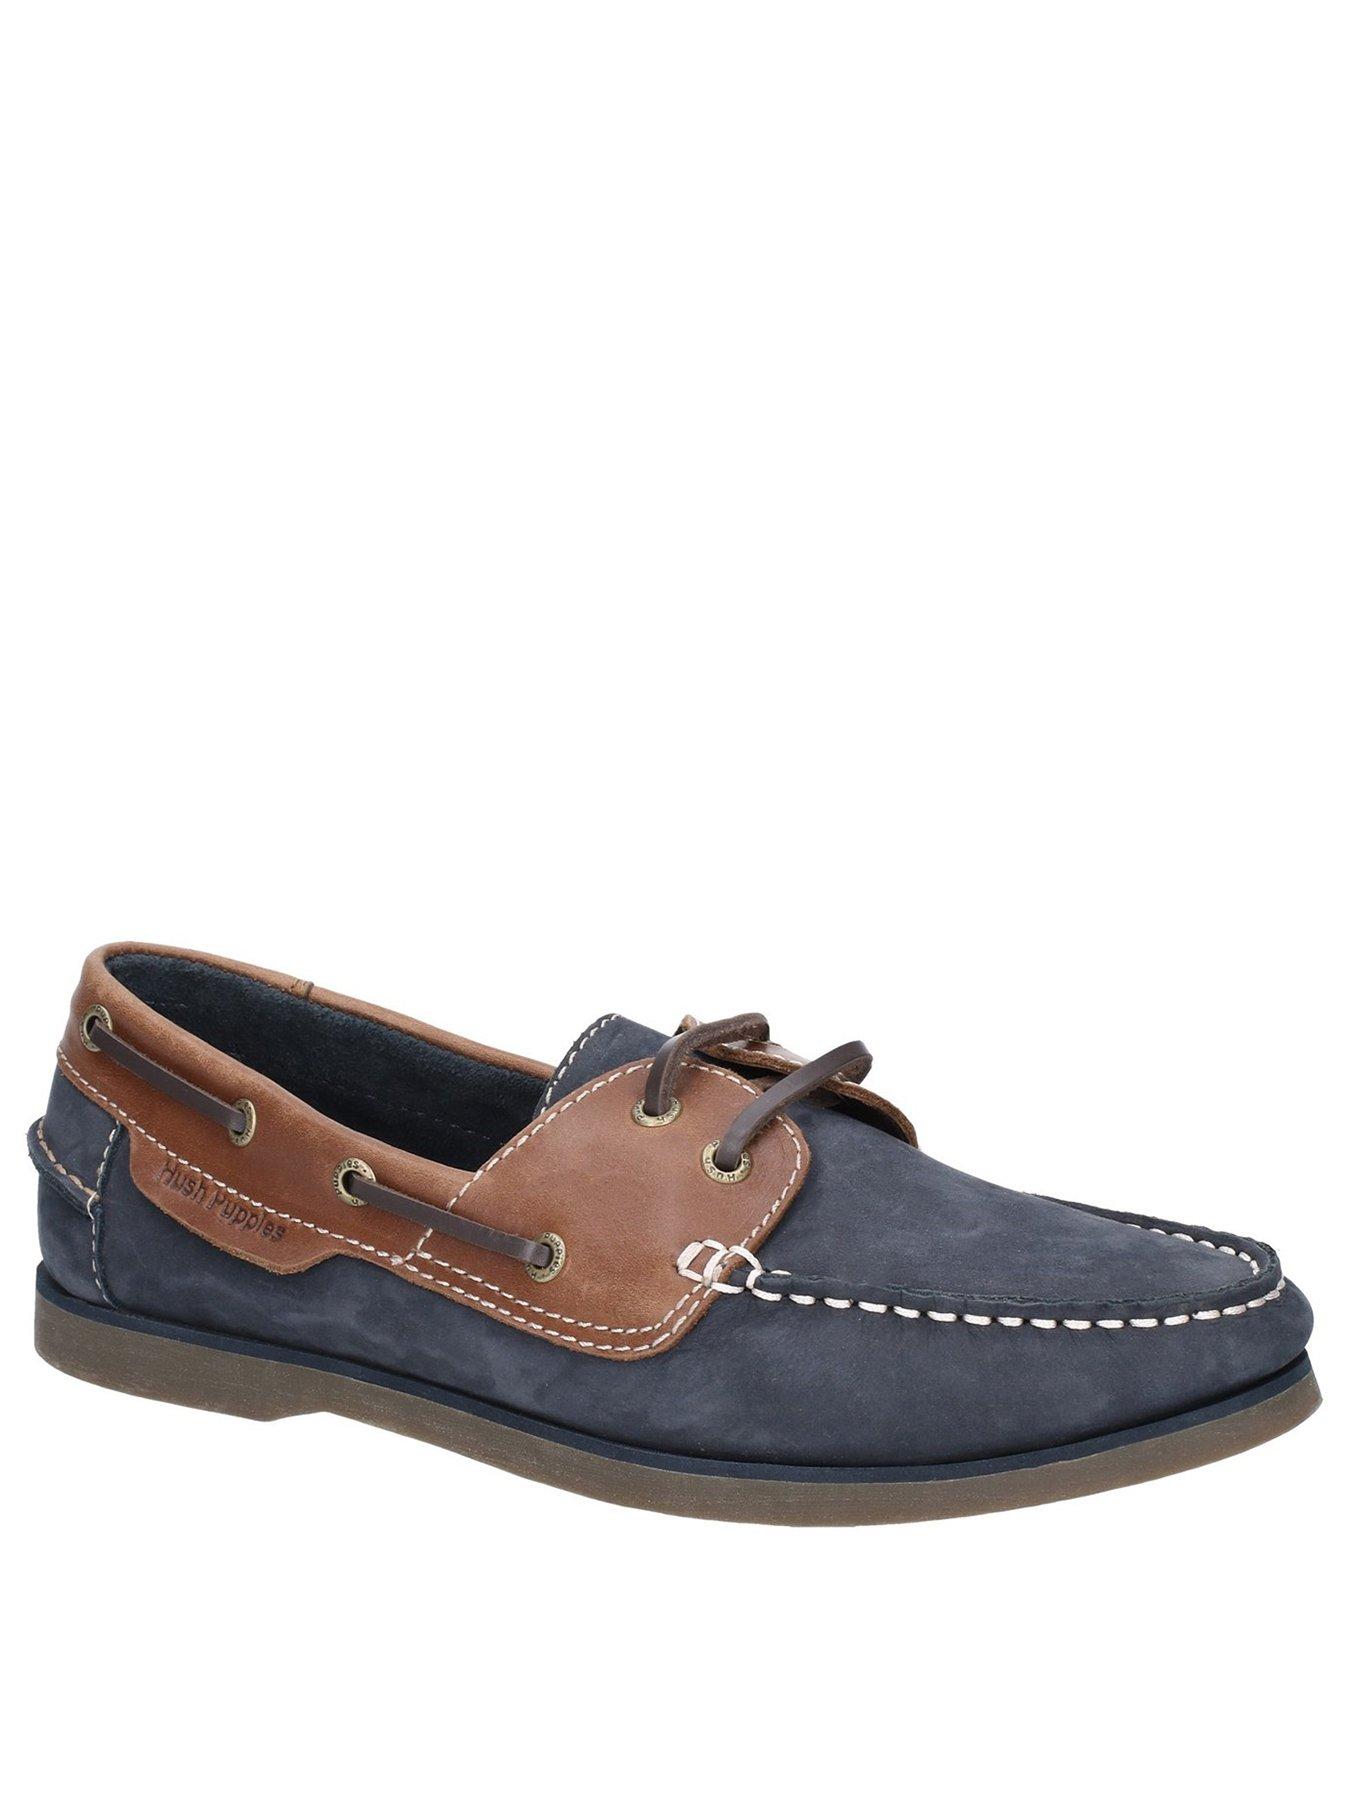 Hush Puppies Henry Boat Shoes Blue | very.co.uk